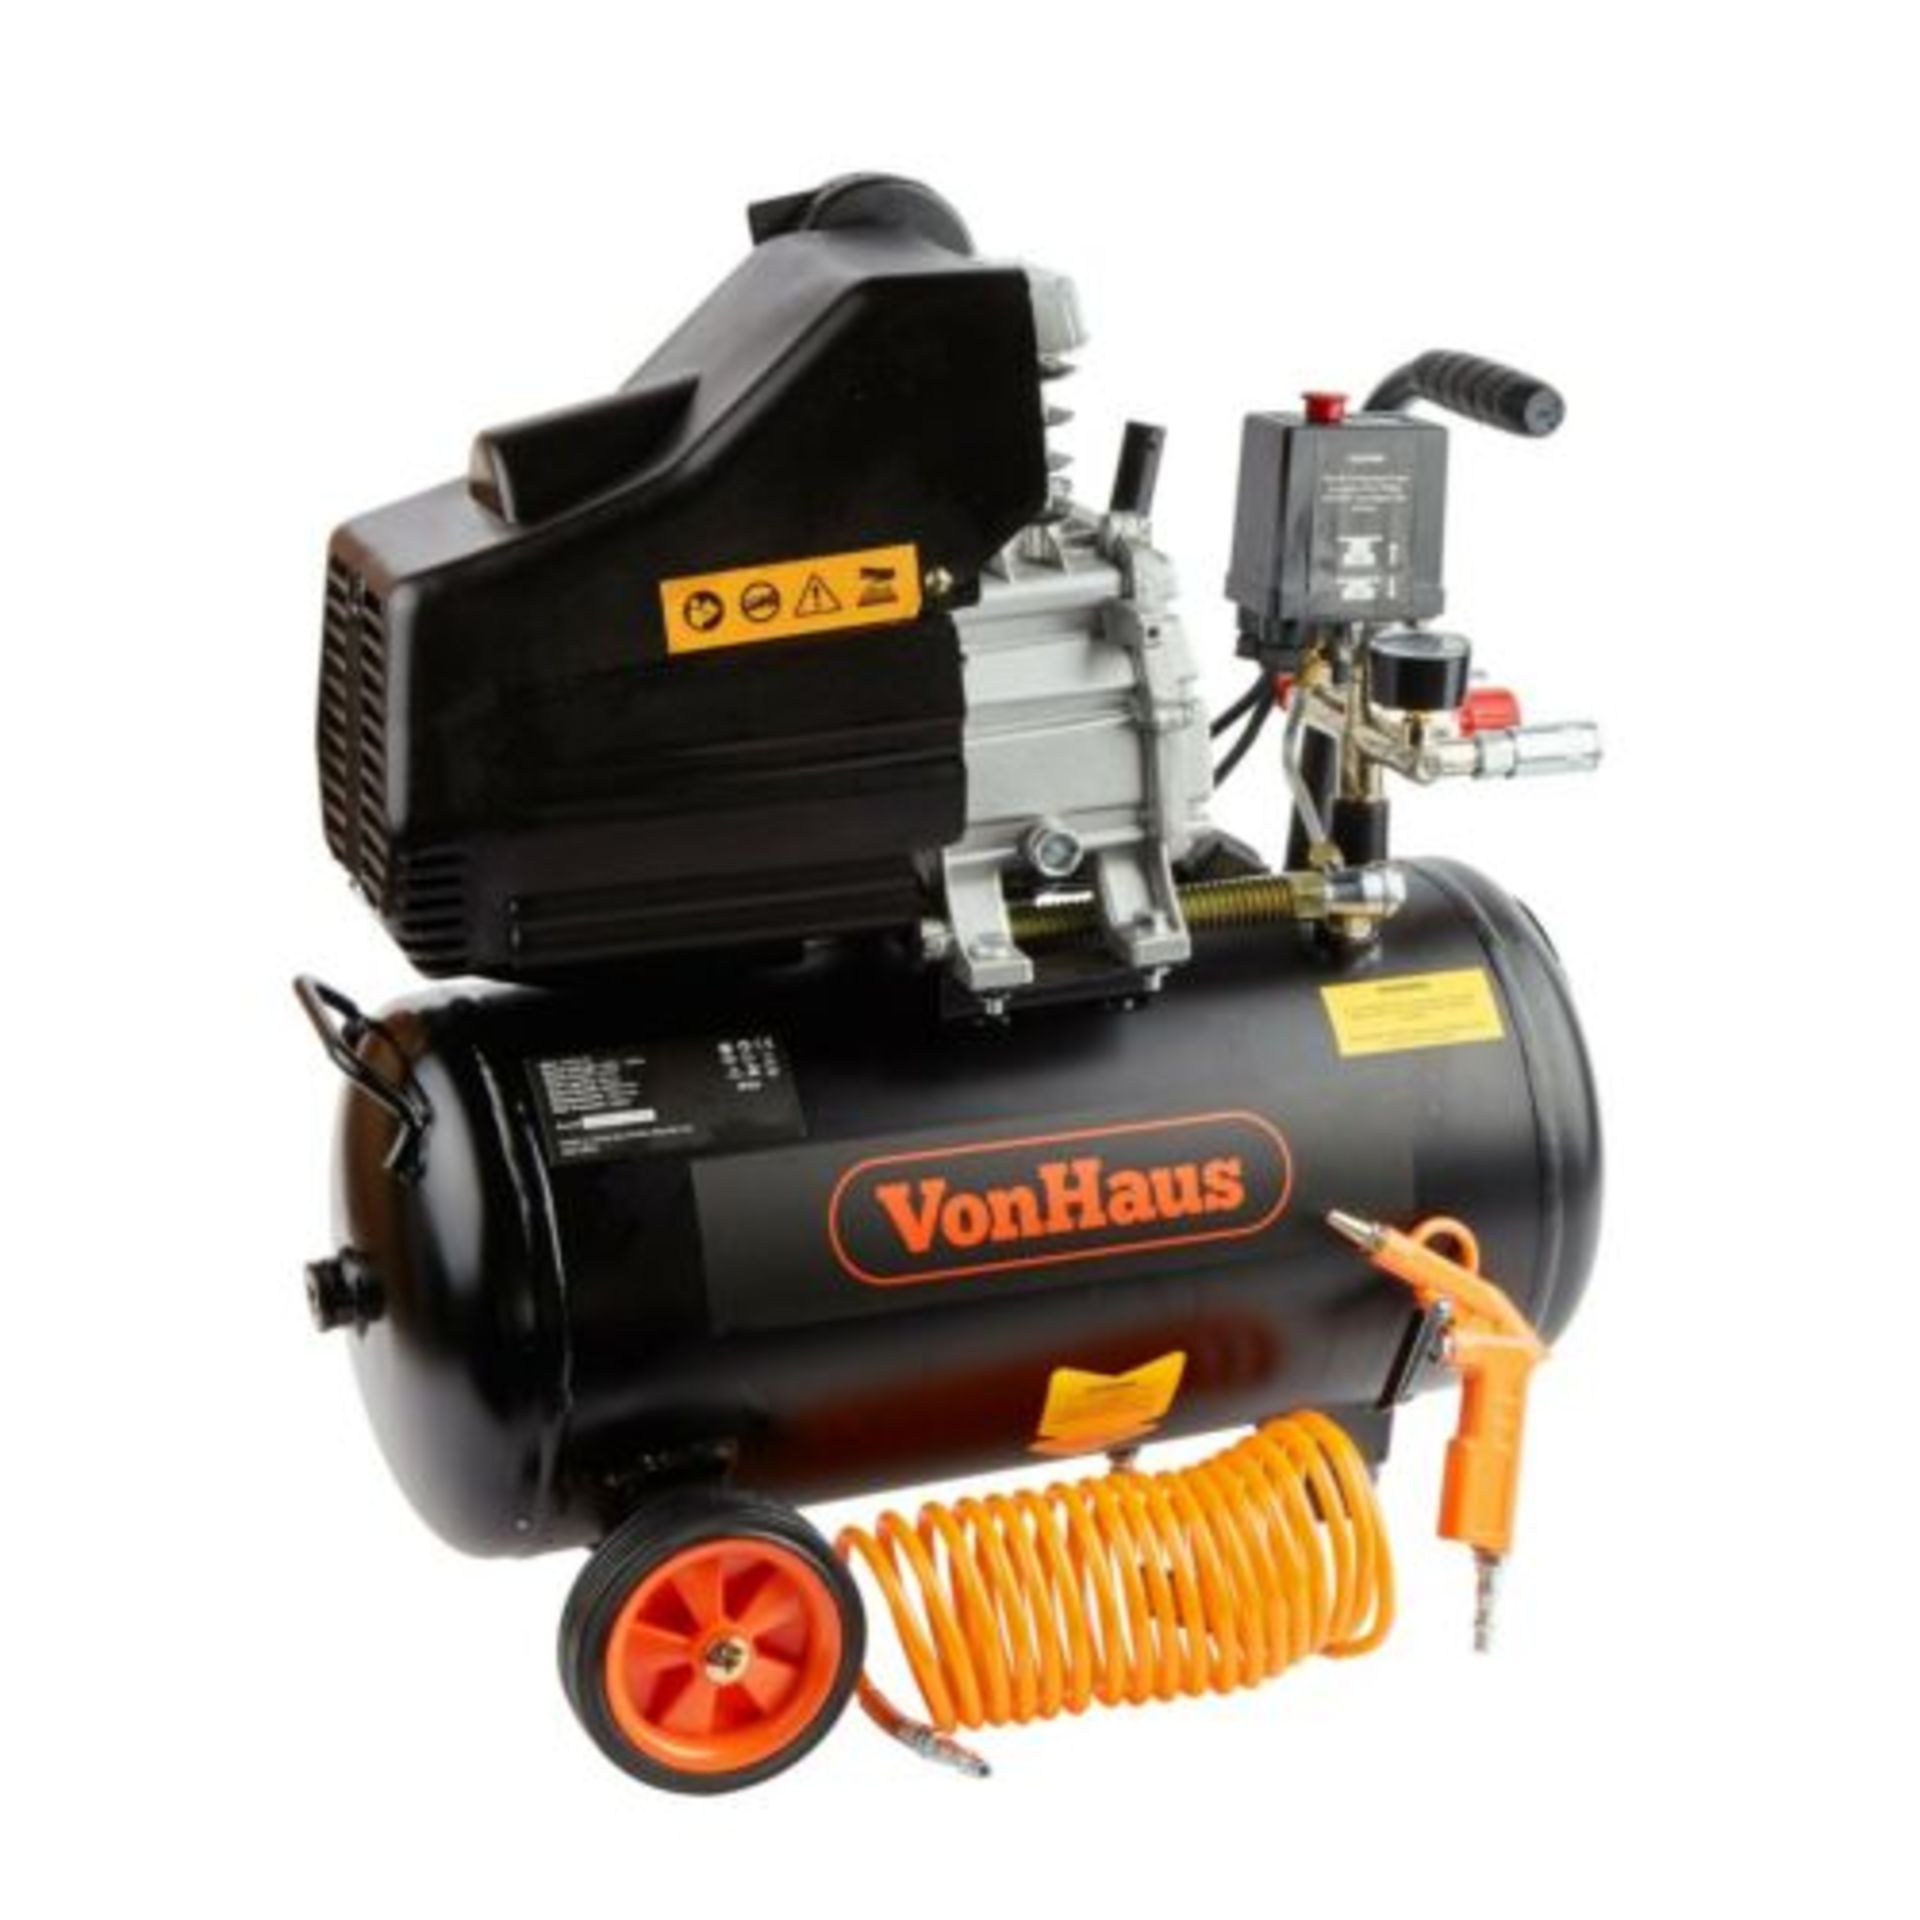 BRAND NEW 24L AIR COMPRESSOR WITH ACCESSORY KITS